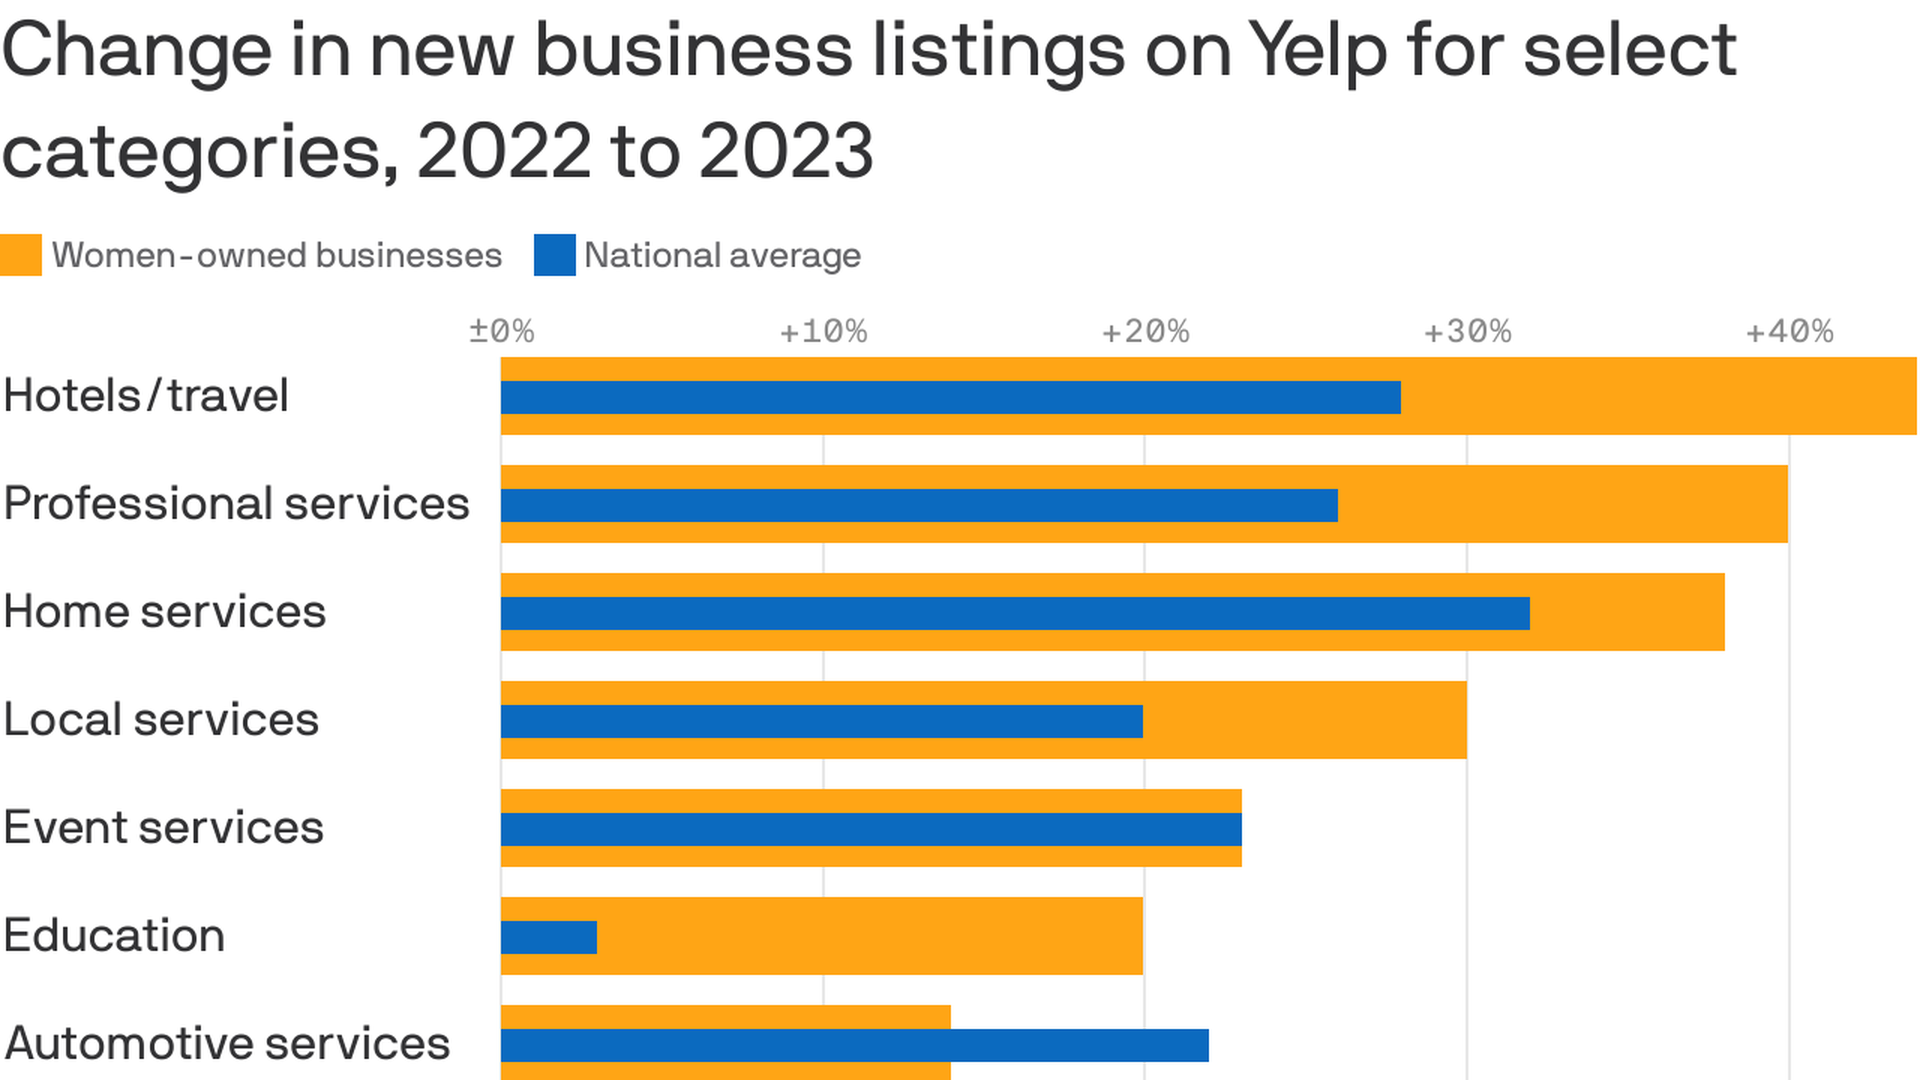 A bullet chart showing the change in women-owned business openings compared to the national average for select categories from 2022 and 2023. Hotels and travel (+44%), professional services (+40)%, and home services (+38%) had the greatest increases.